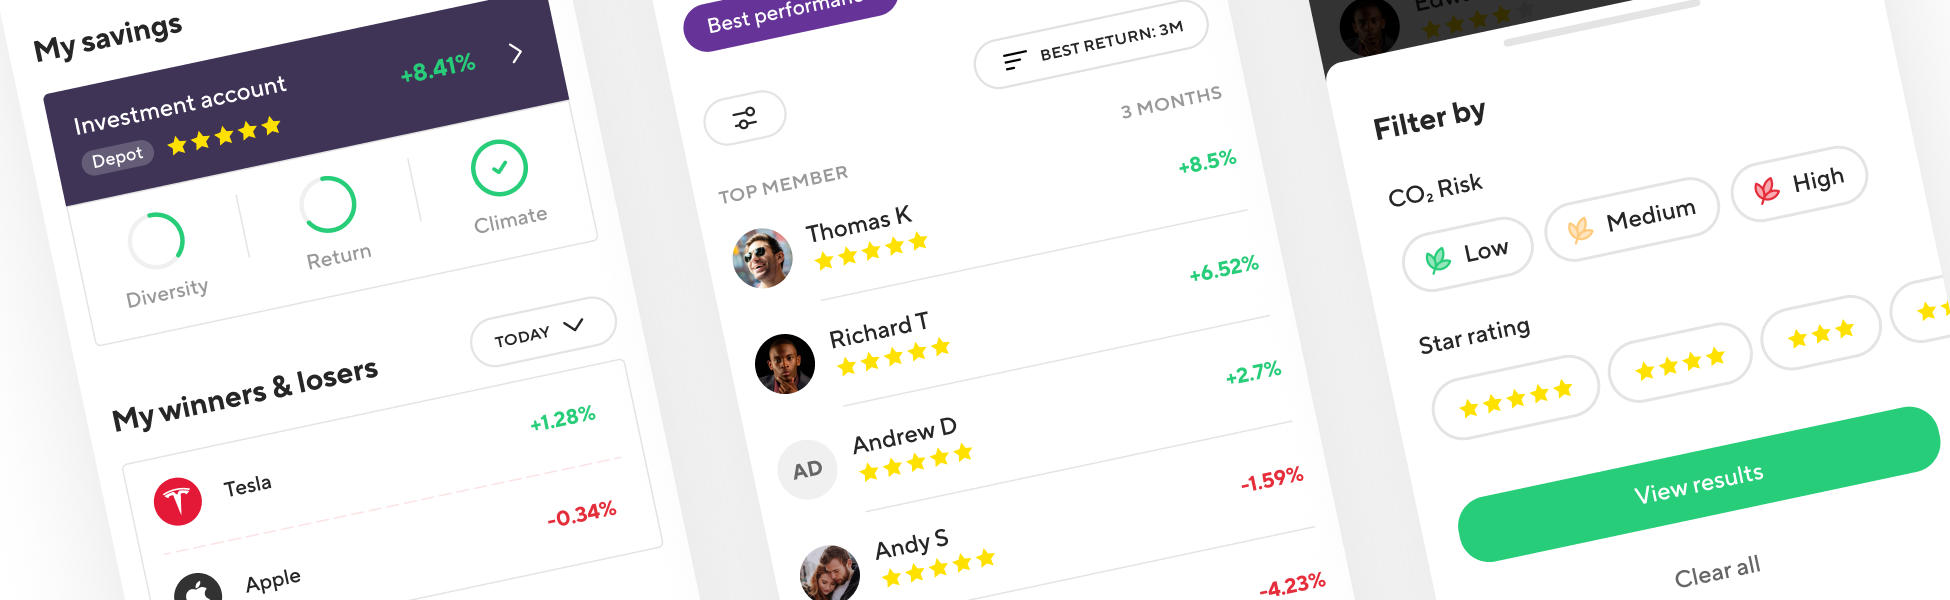 A graphic illustrating our 5-star rating system, which uses a proprietary algorithm to assess portfolios based on risk-adjusted returns, incentivizing prudent investing and highlighting top-performing influencers in the community.